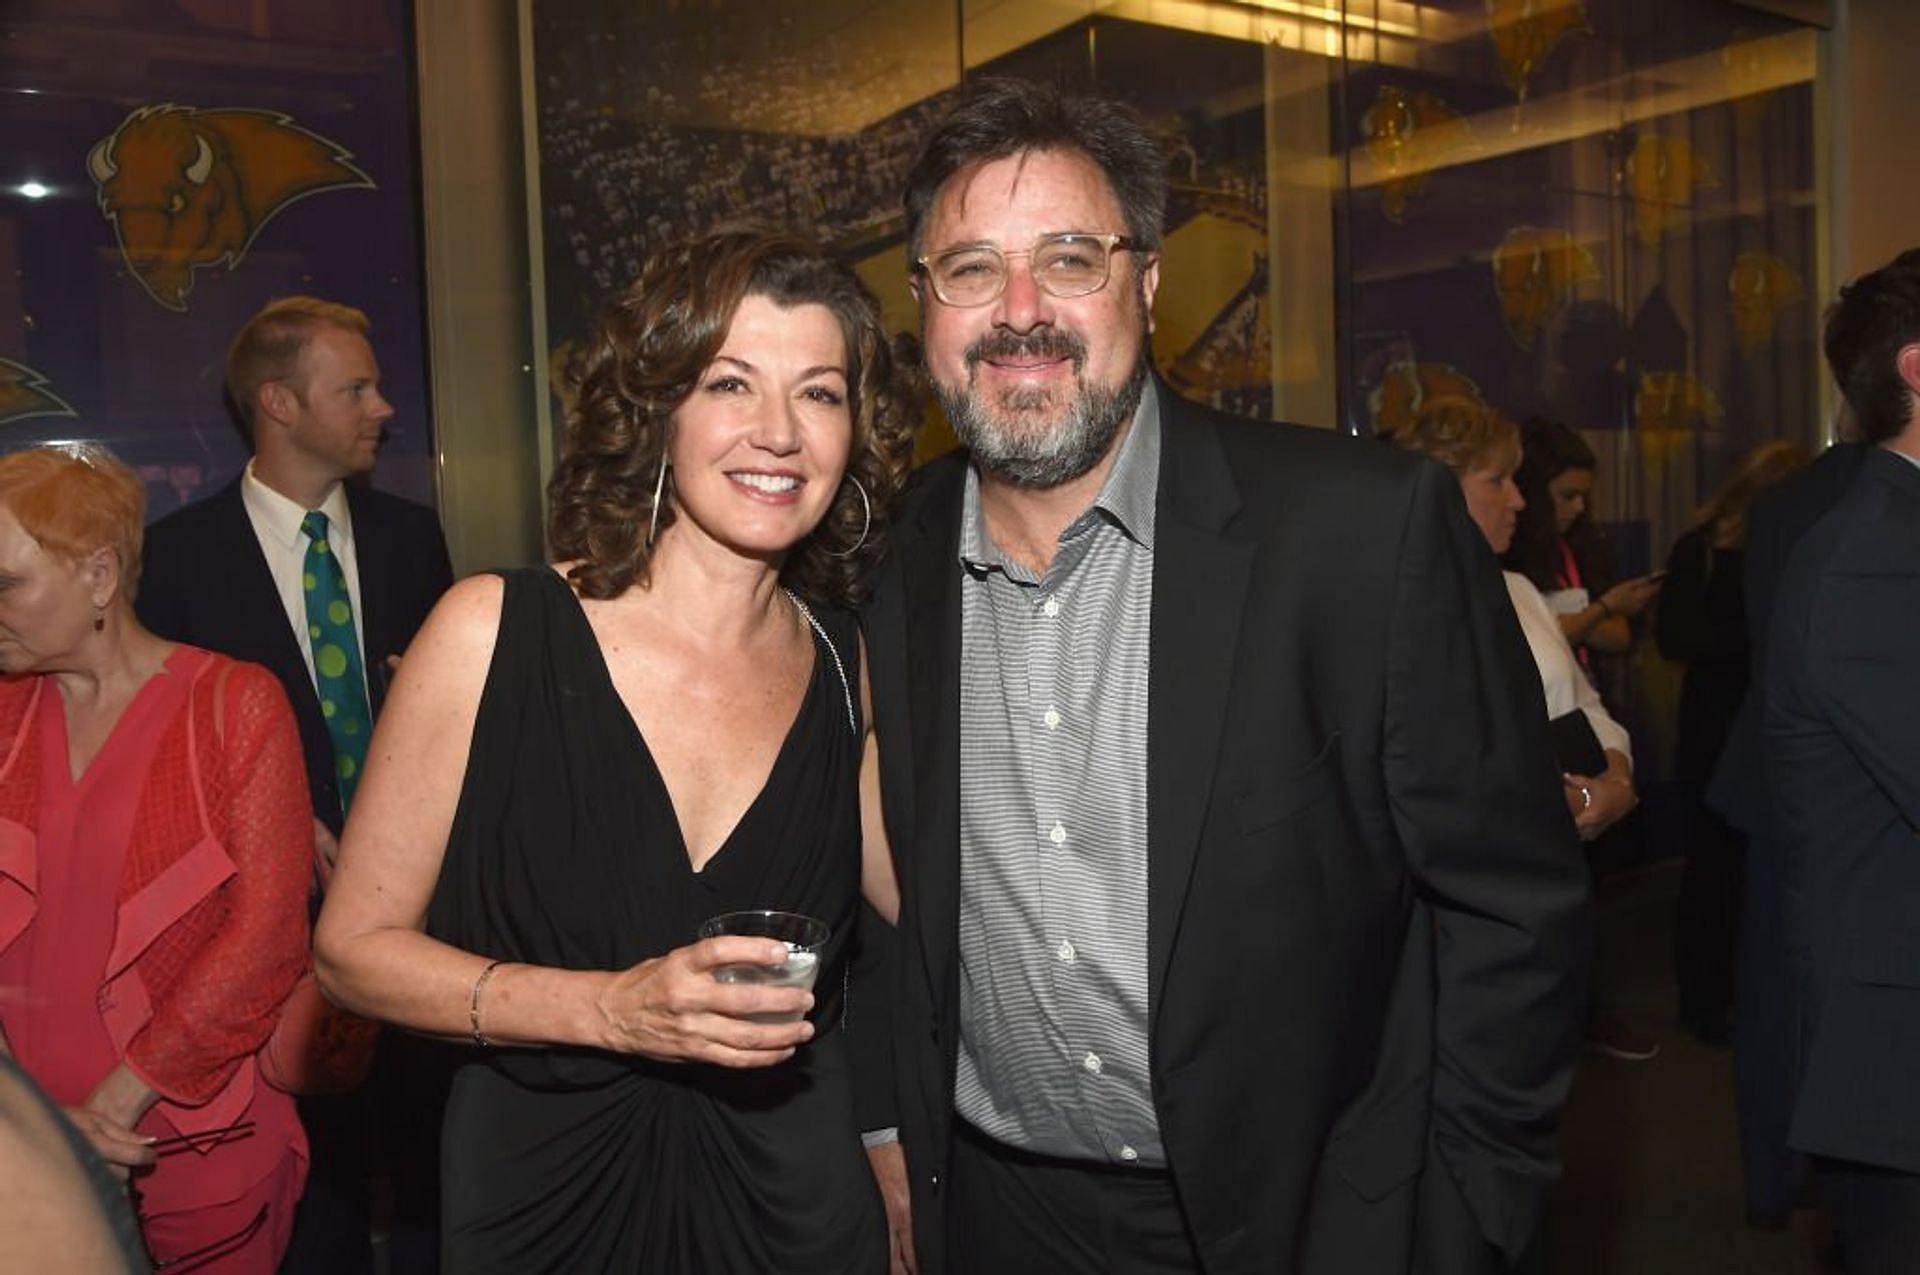 Vince Gill and Amy Grant married after divorcing their respective partners (Image via Rick Diamond/Getty Images)